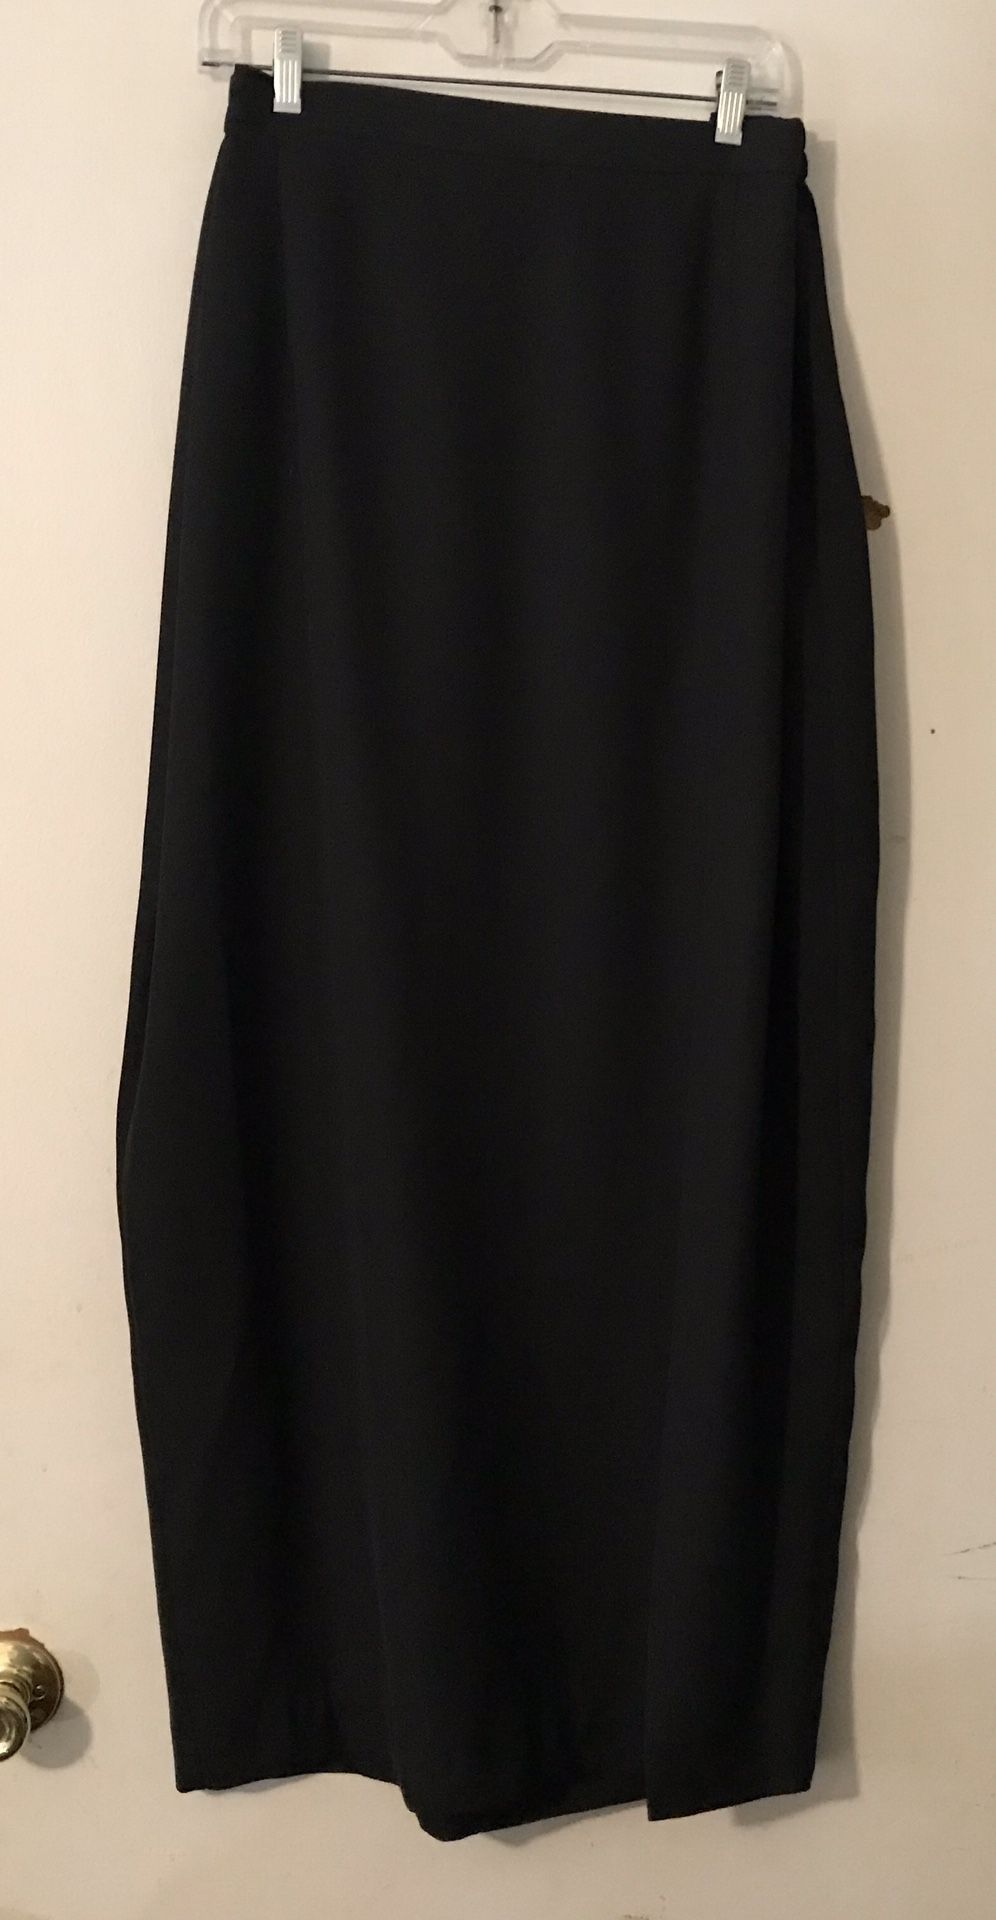 WOMEN’S CLOTHING BLACK LONG DRESSY SKIRT WITH SLIT IN THE FRONT